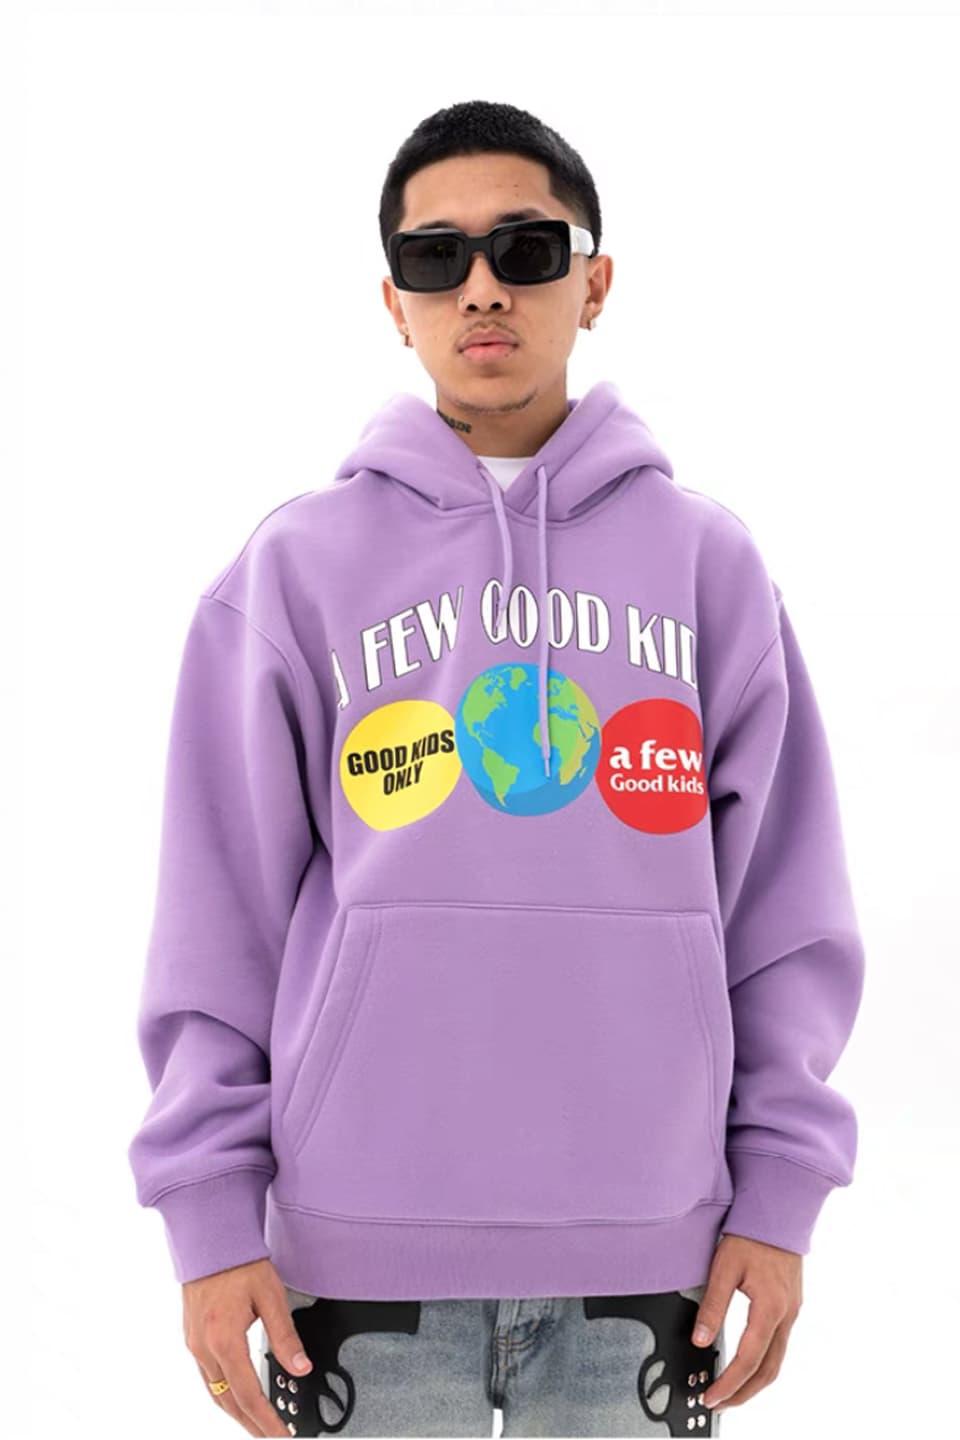 A FEW GOOD KIDS(アフューグッドキッズ) パーカー EARTH ON THE HOODIE正規取扱通販サイト │ NEXX ONLINE  SHOP